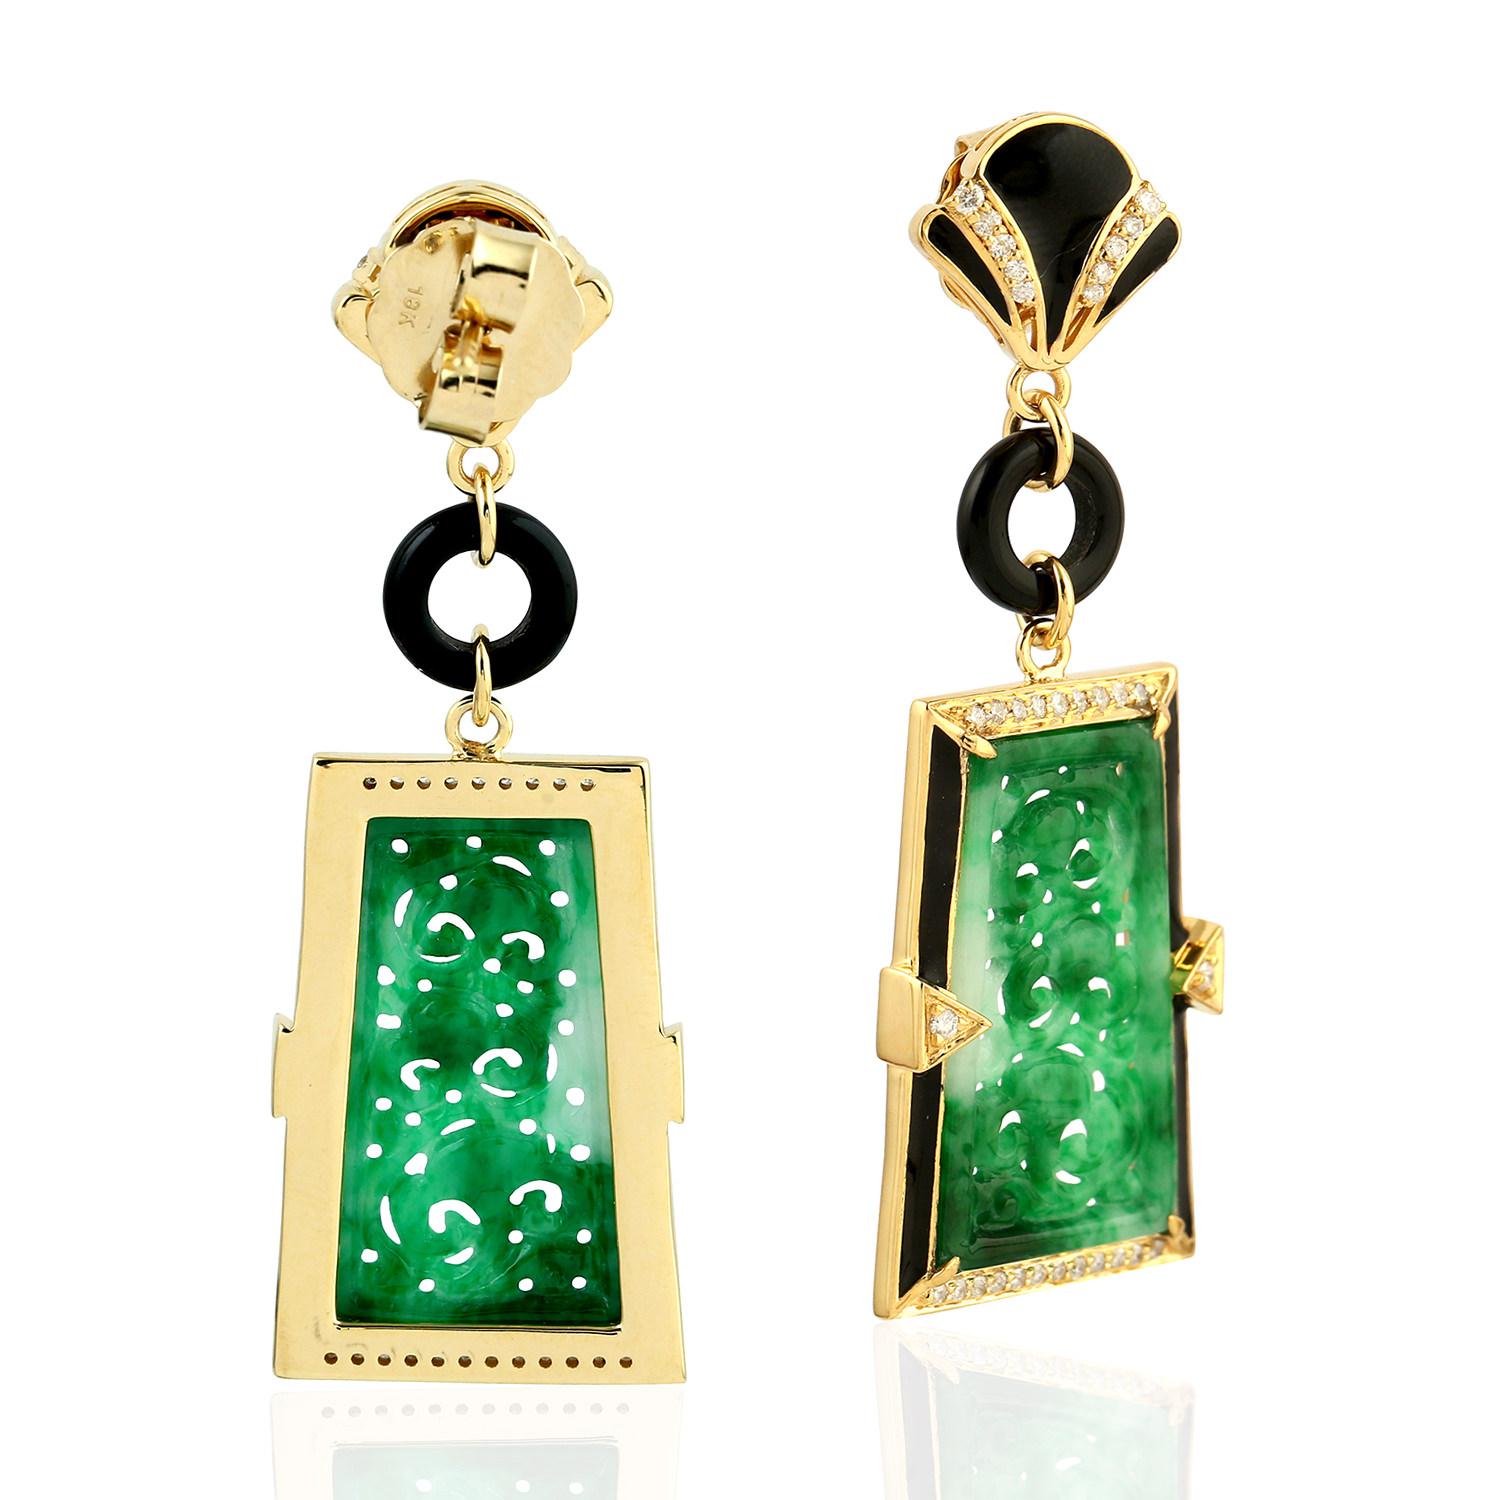 Contemporary 10.71 ct Carved Jade Dangle Earrings With Black Onyx & Diamonds In 18k Gold For Sale